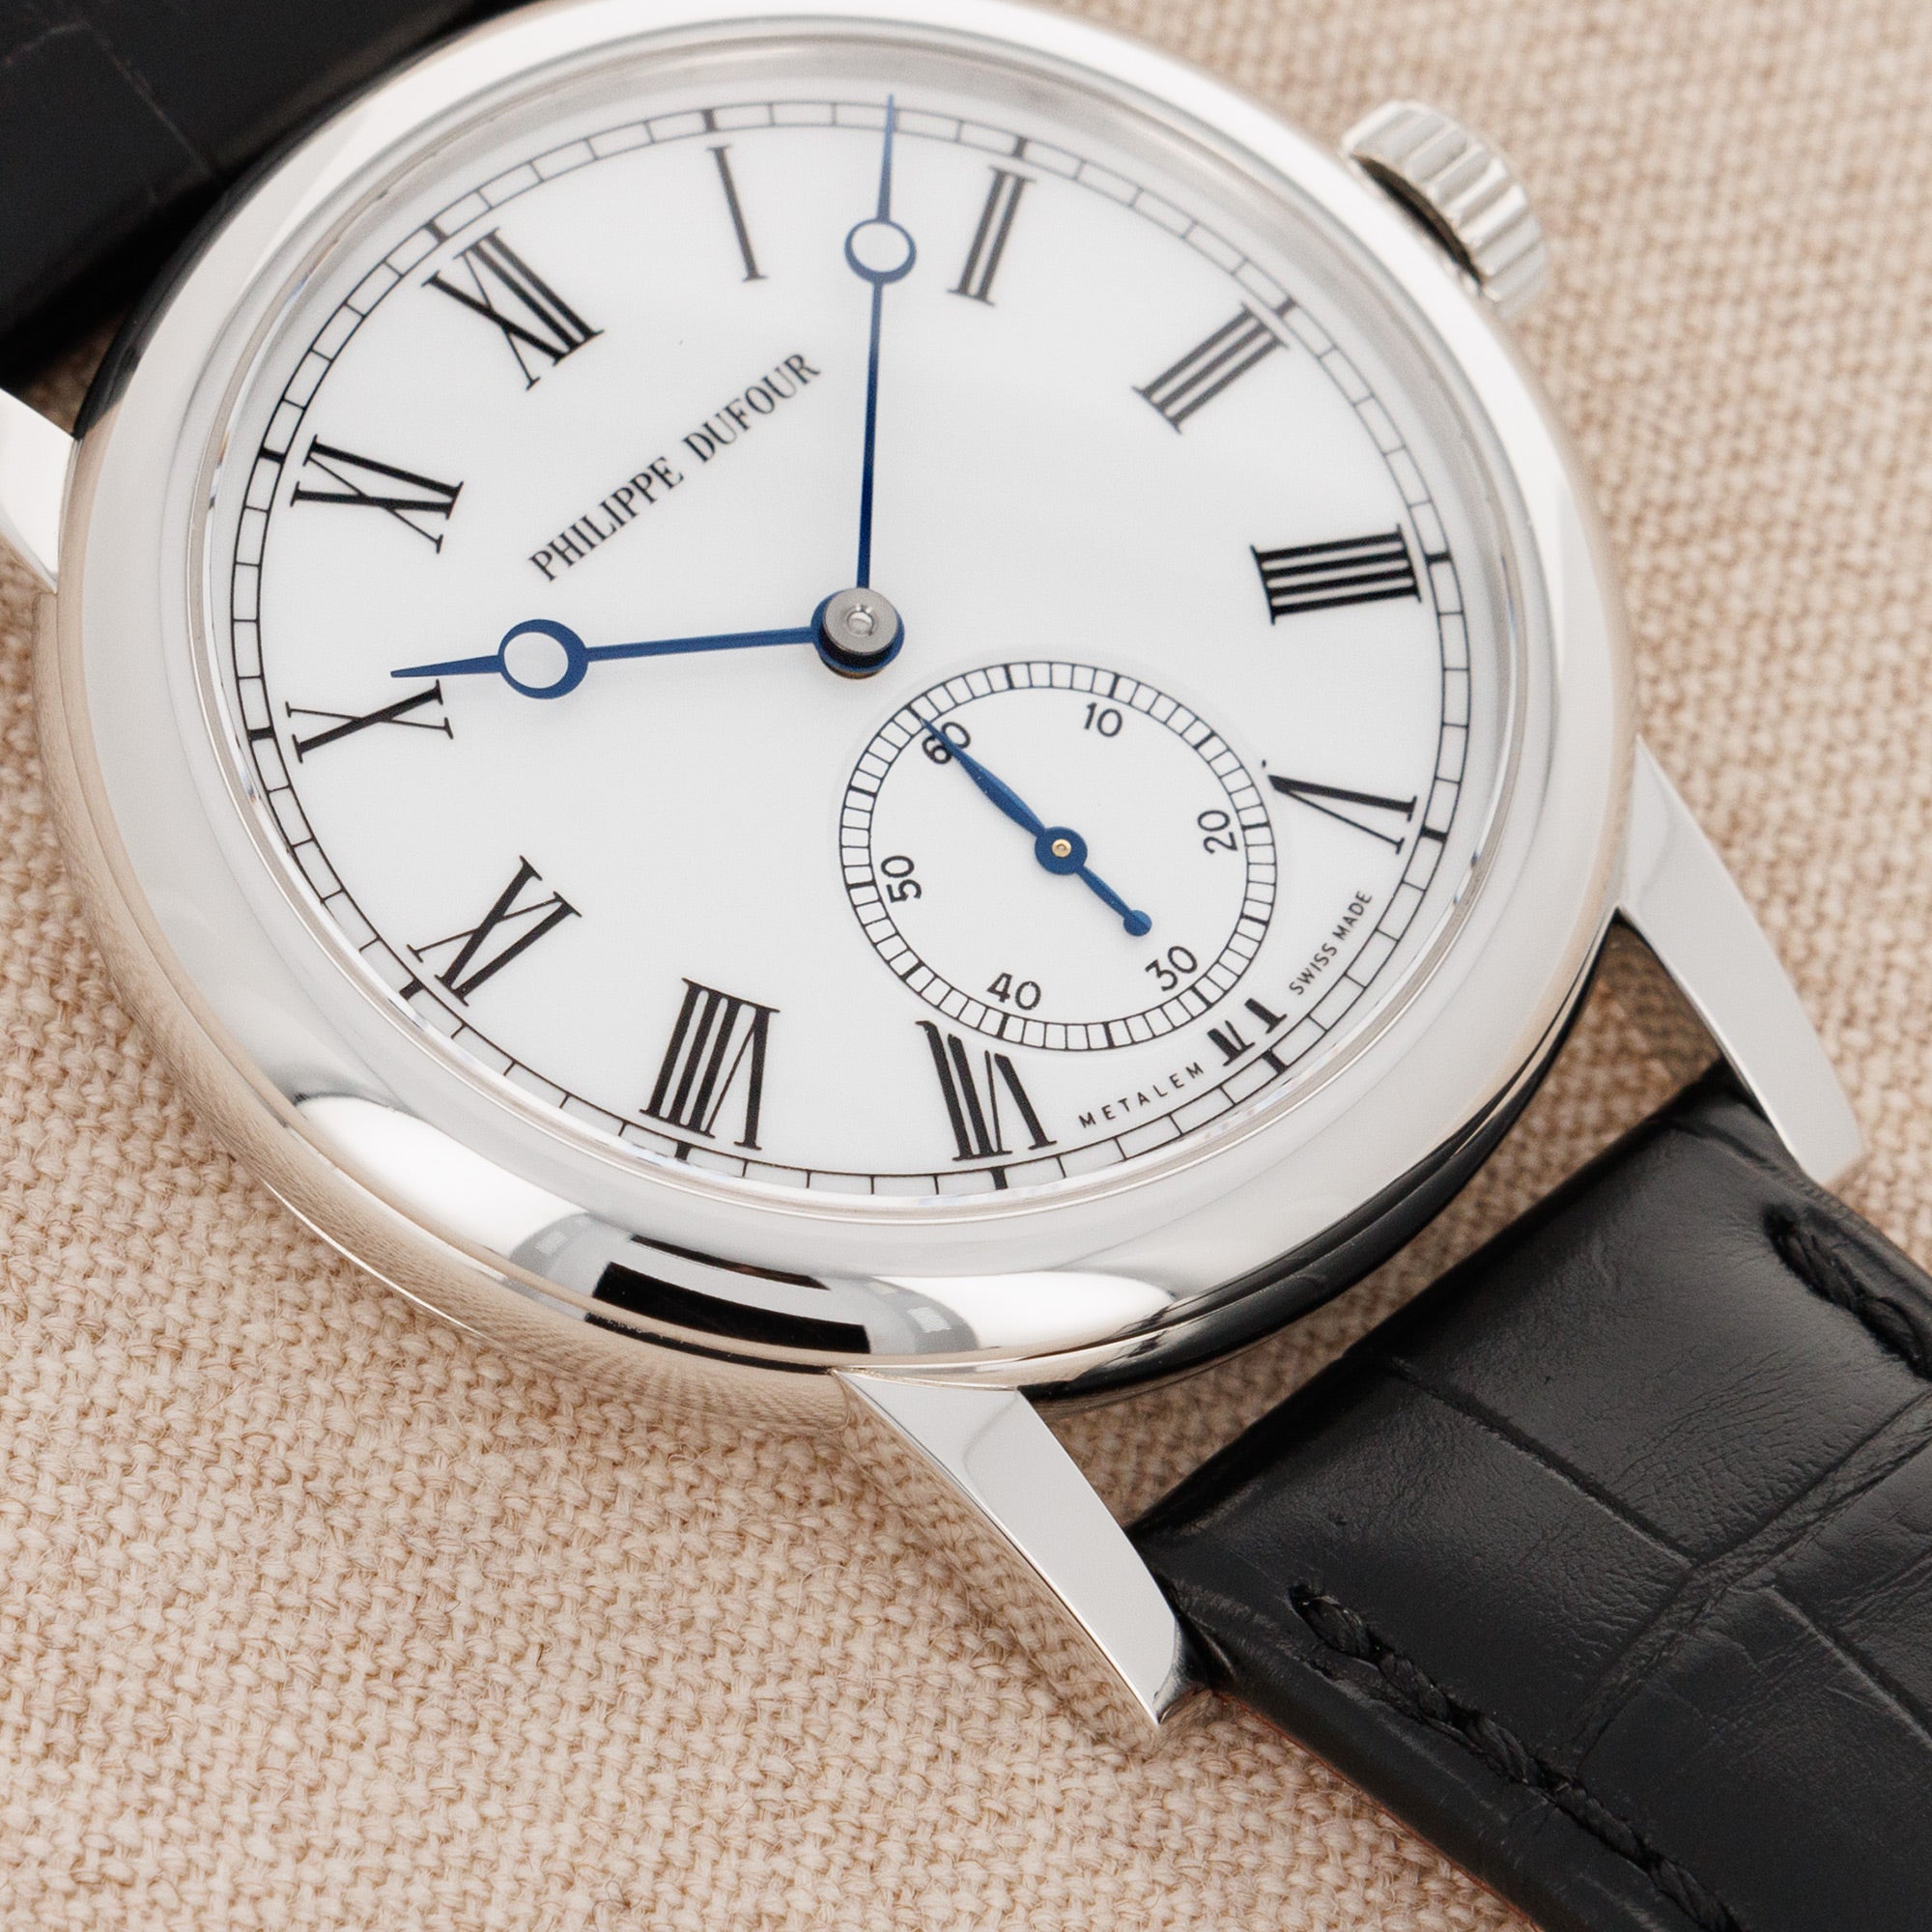 Philippe Dufour - Philippe Dufour Platinum Simplicity Watch - The Keystone Watches